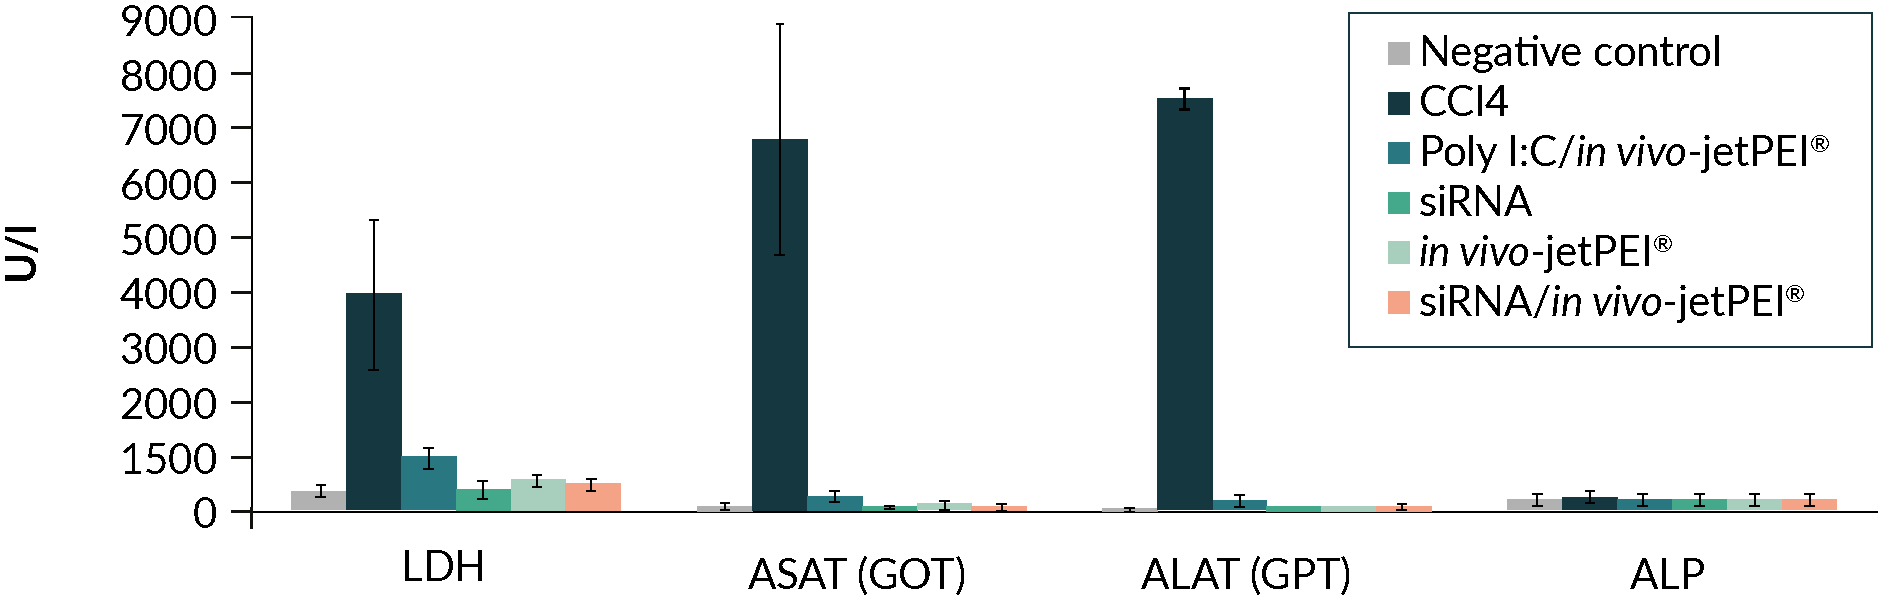 Complexes were formed in 200 μl of 5% glucose using 40 μg of luciferase expressing plasmid with in vivo-jetPEI® at an N/P ratio of 8, and injected through retro-orbital sinus. 24 hours after injection, blood was collected and the level of LDH, ASAT, ALAT and ALP was measured. Each value corresponds to the mean ± SD (n = 8). As a positive control, CCl4 was subcutaneously administered.